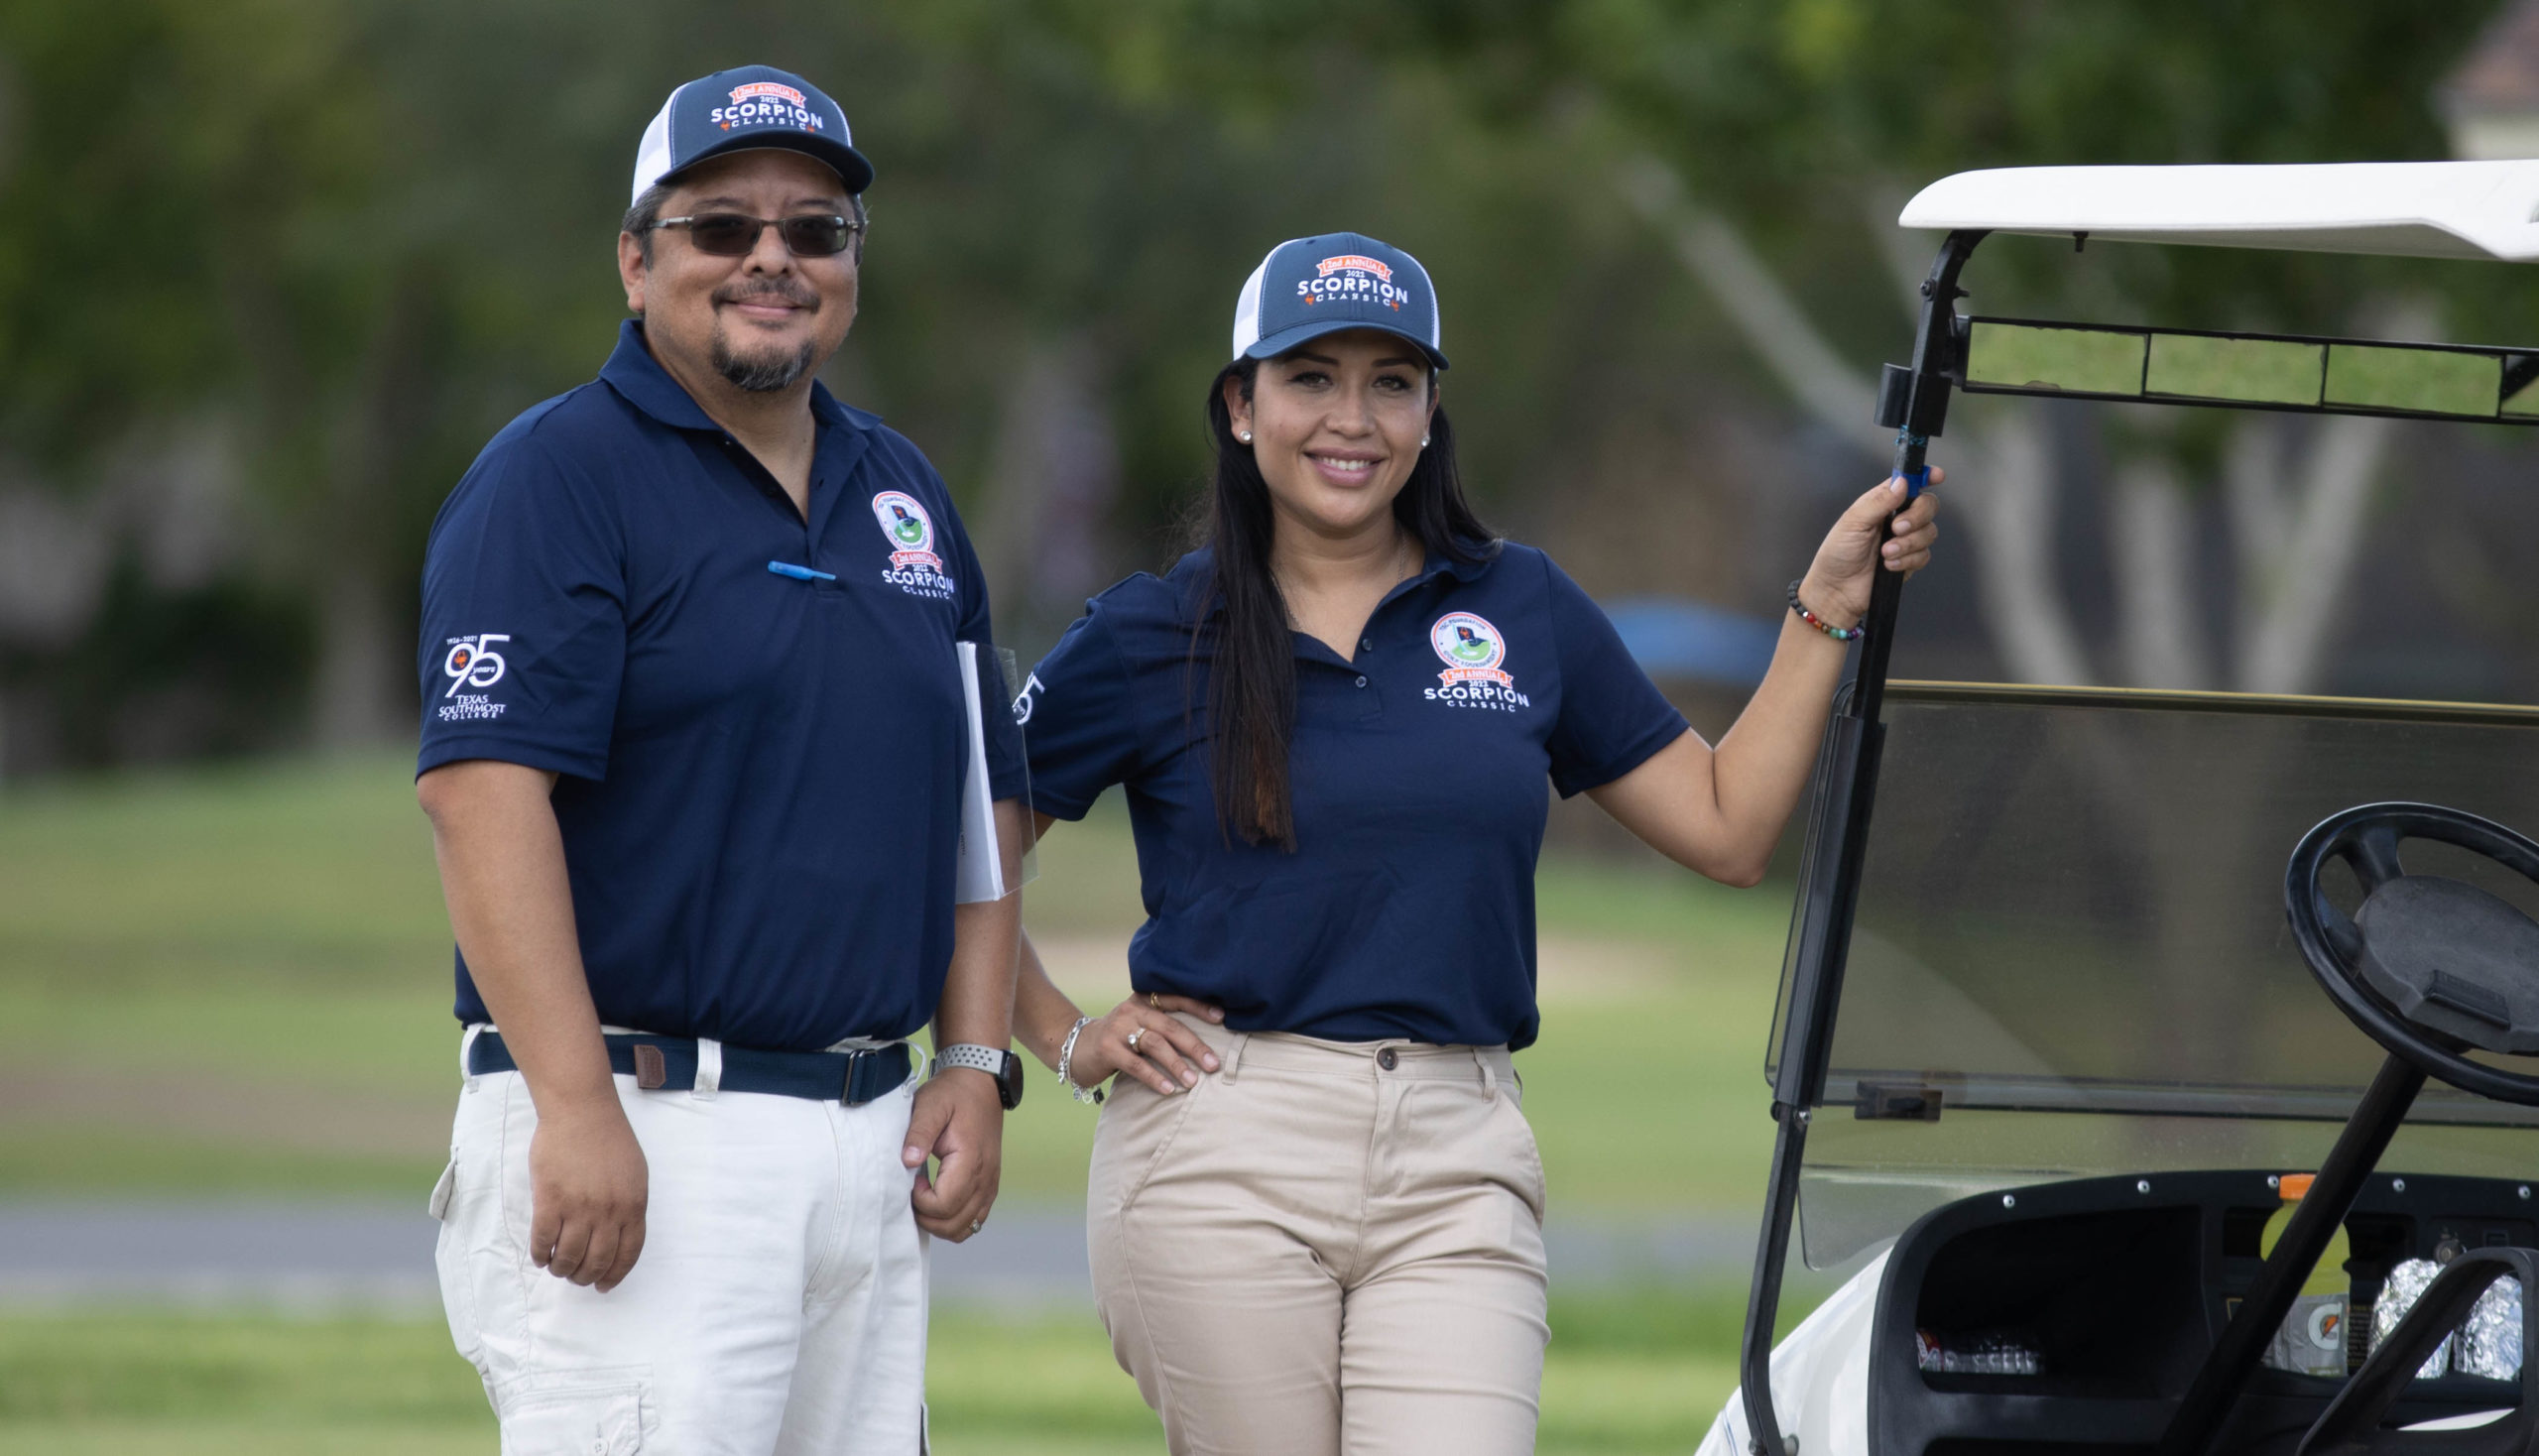 Second Annual Scorpion Classic Golf Tournament at Rancho Viejo Resort & Country Club